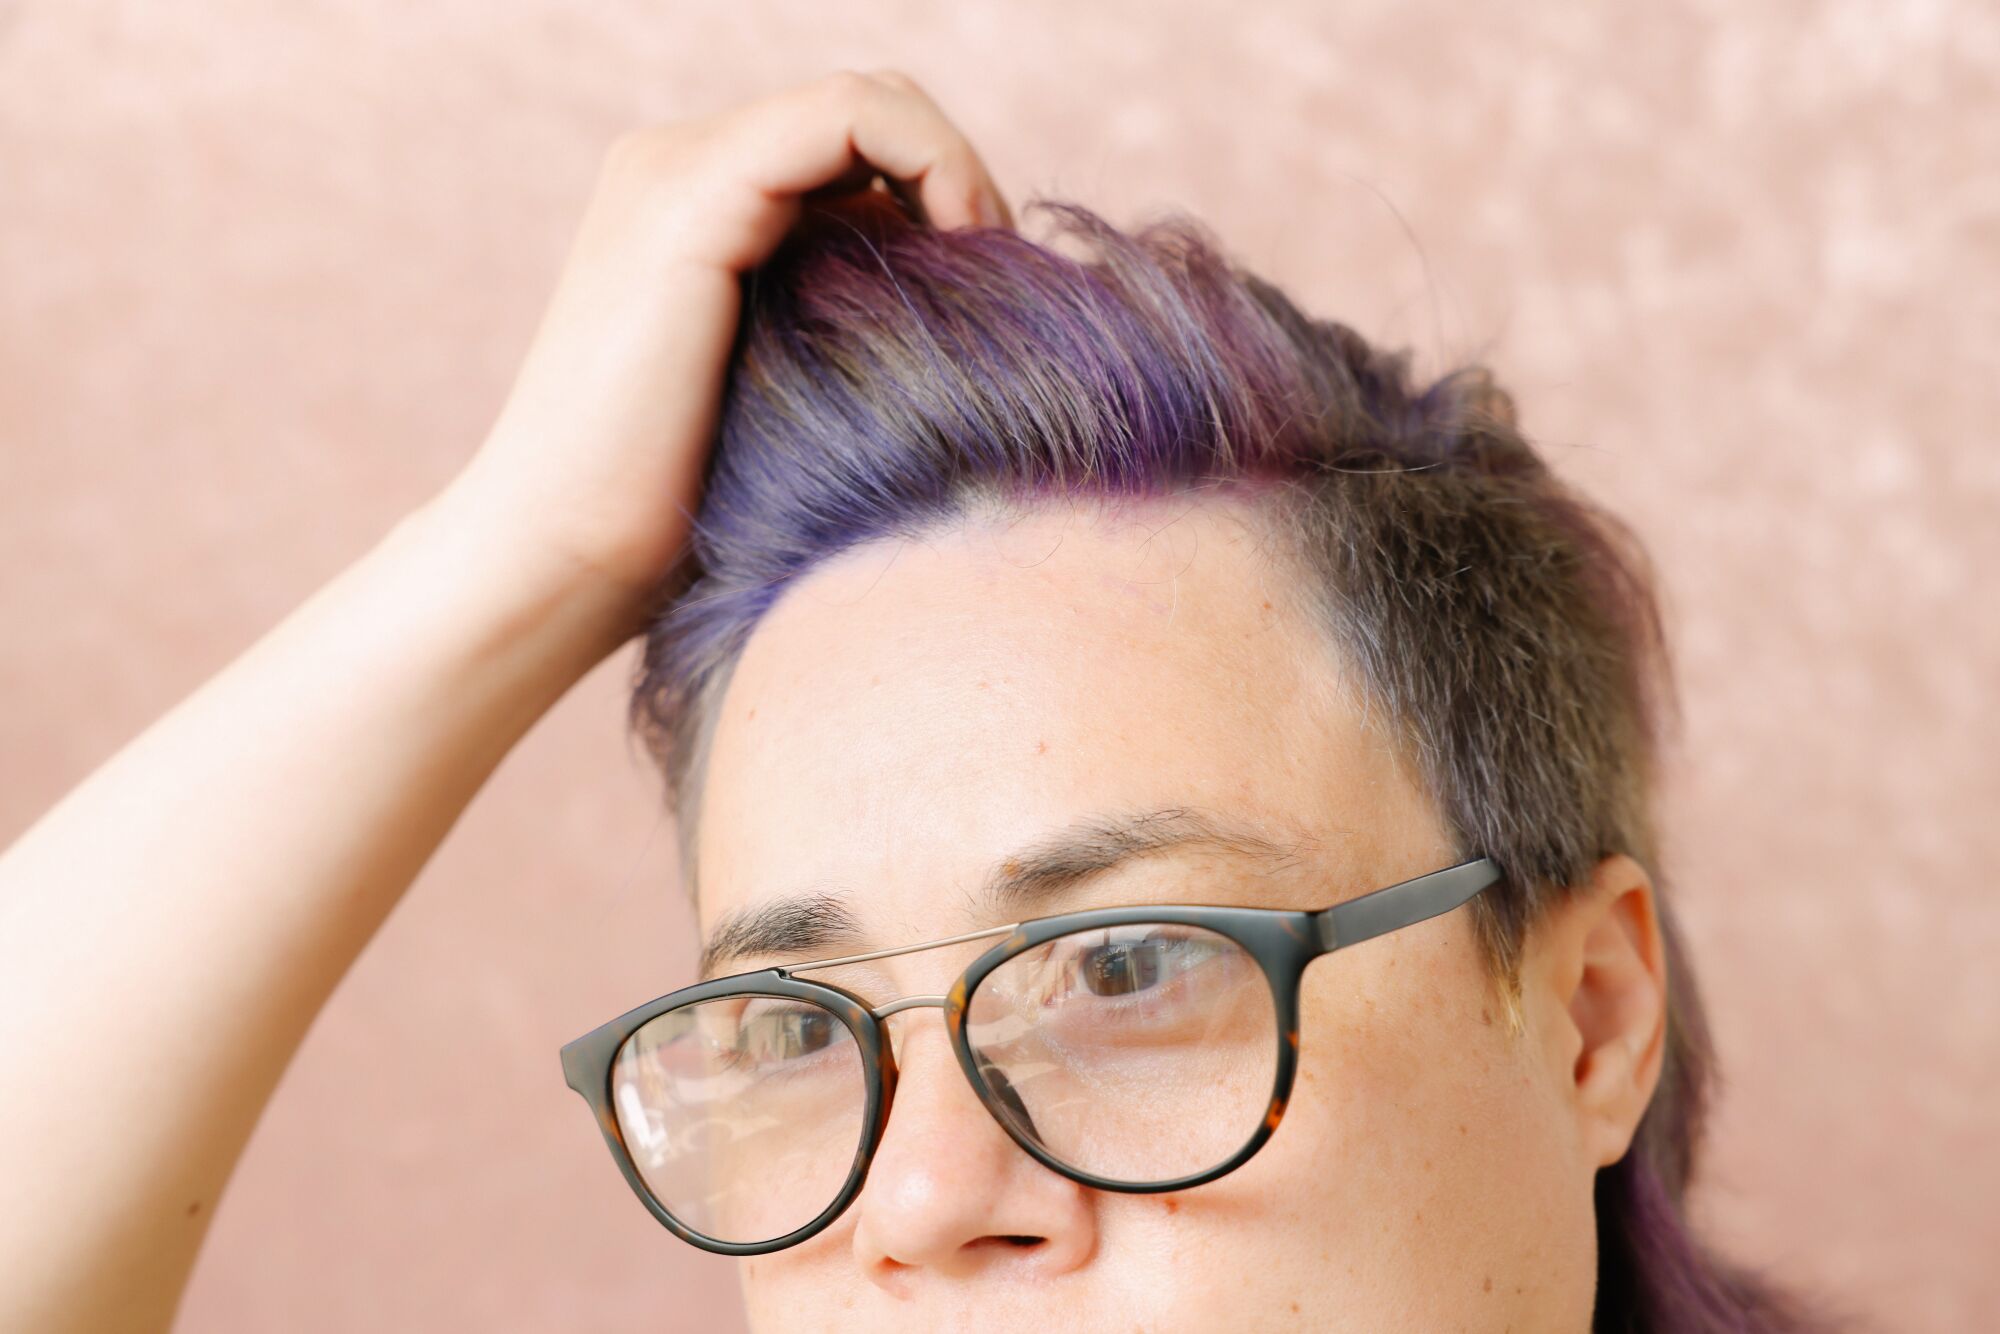 A woman with purple hair and glasses runs her fingers through her hair.